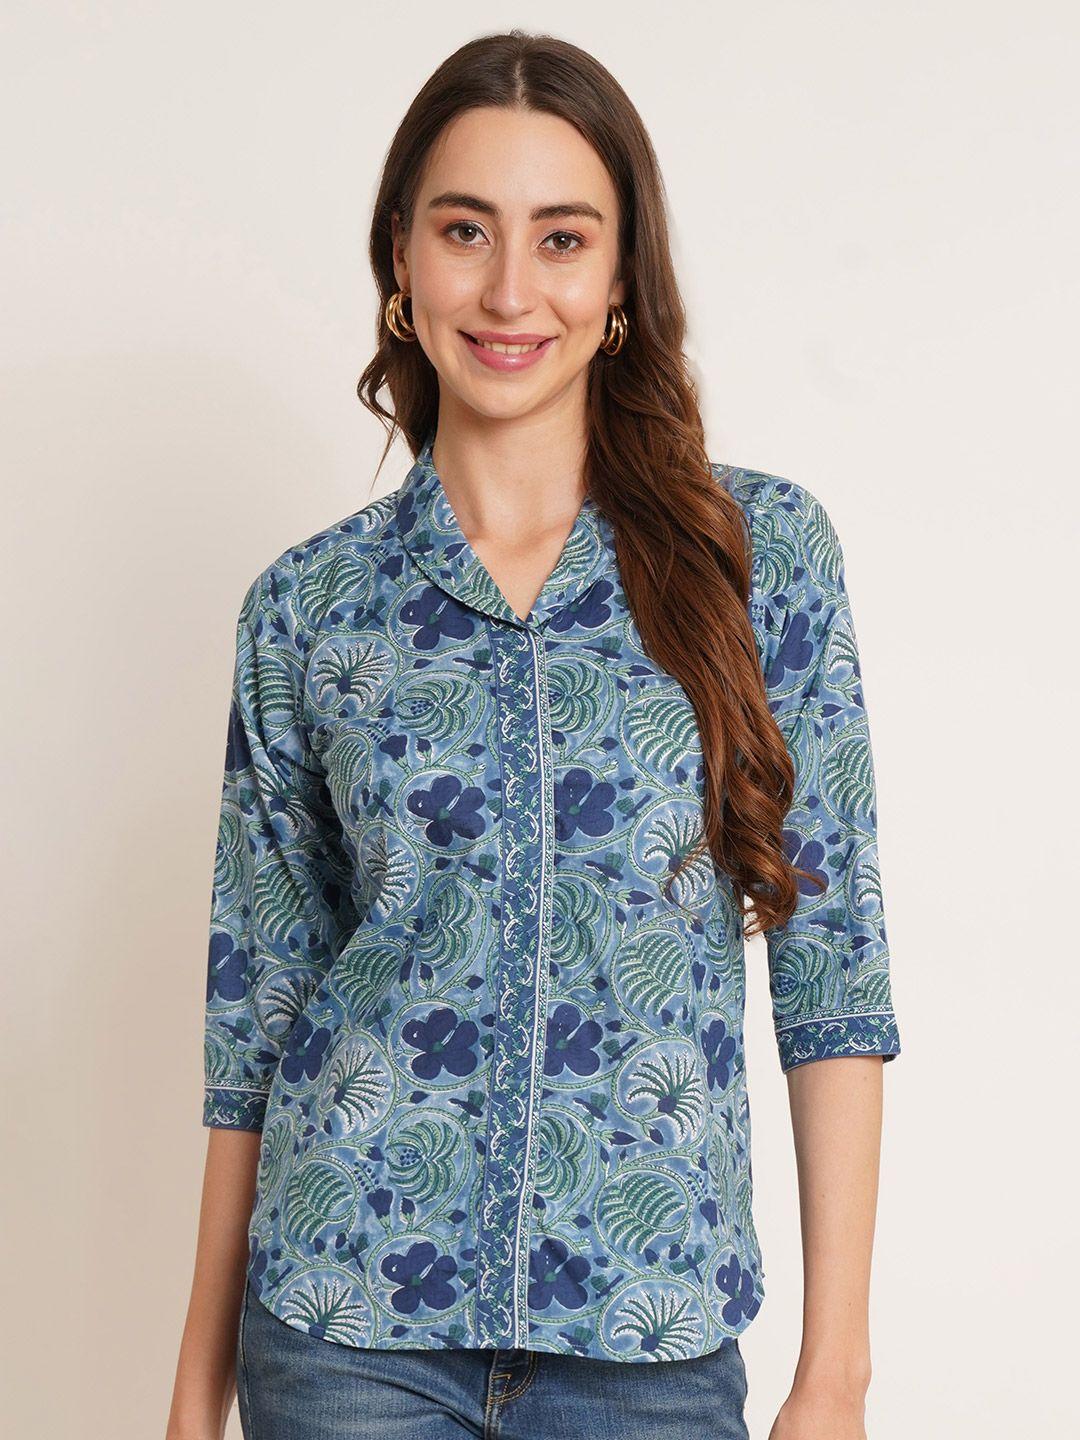 cotland fashion floral printed pure cotton shirt style top